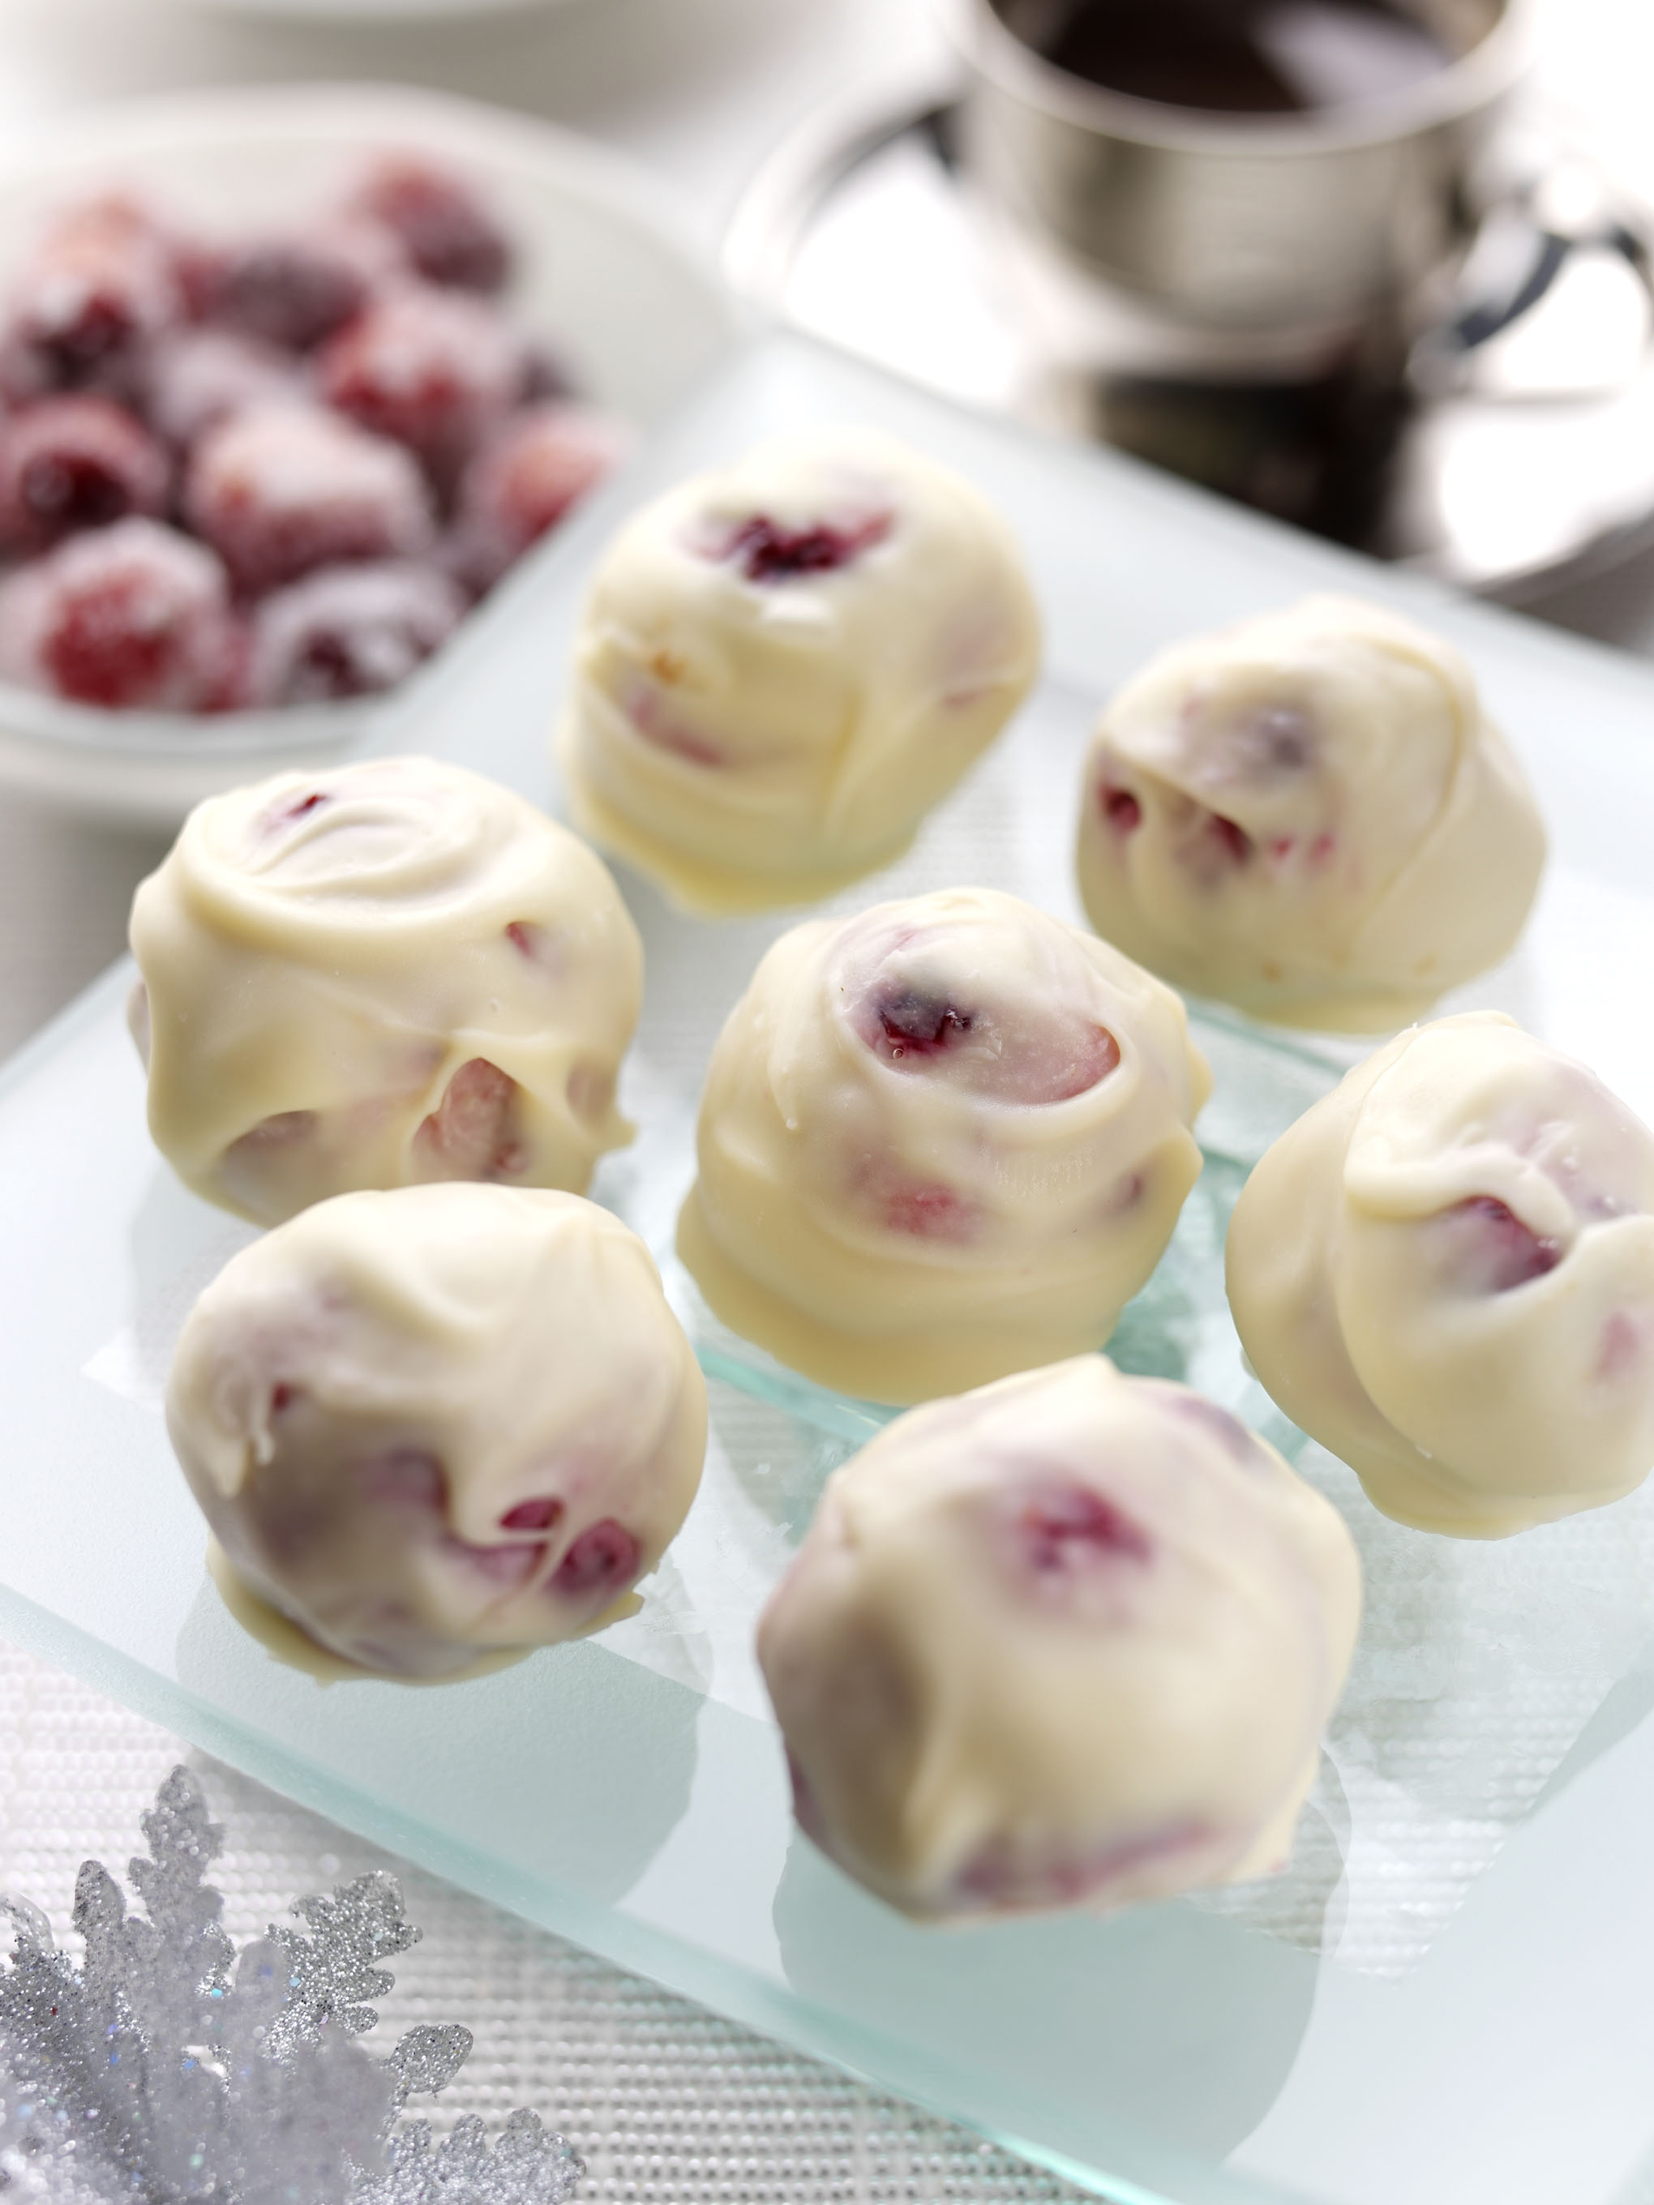 White Chocolate and BerryWorld Cranberry Truffles